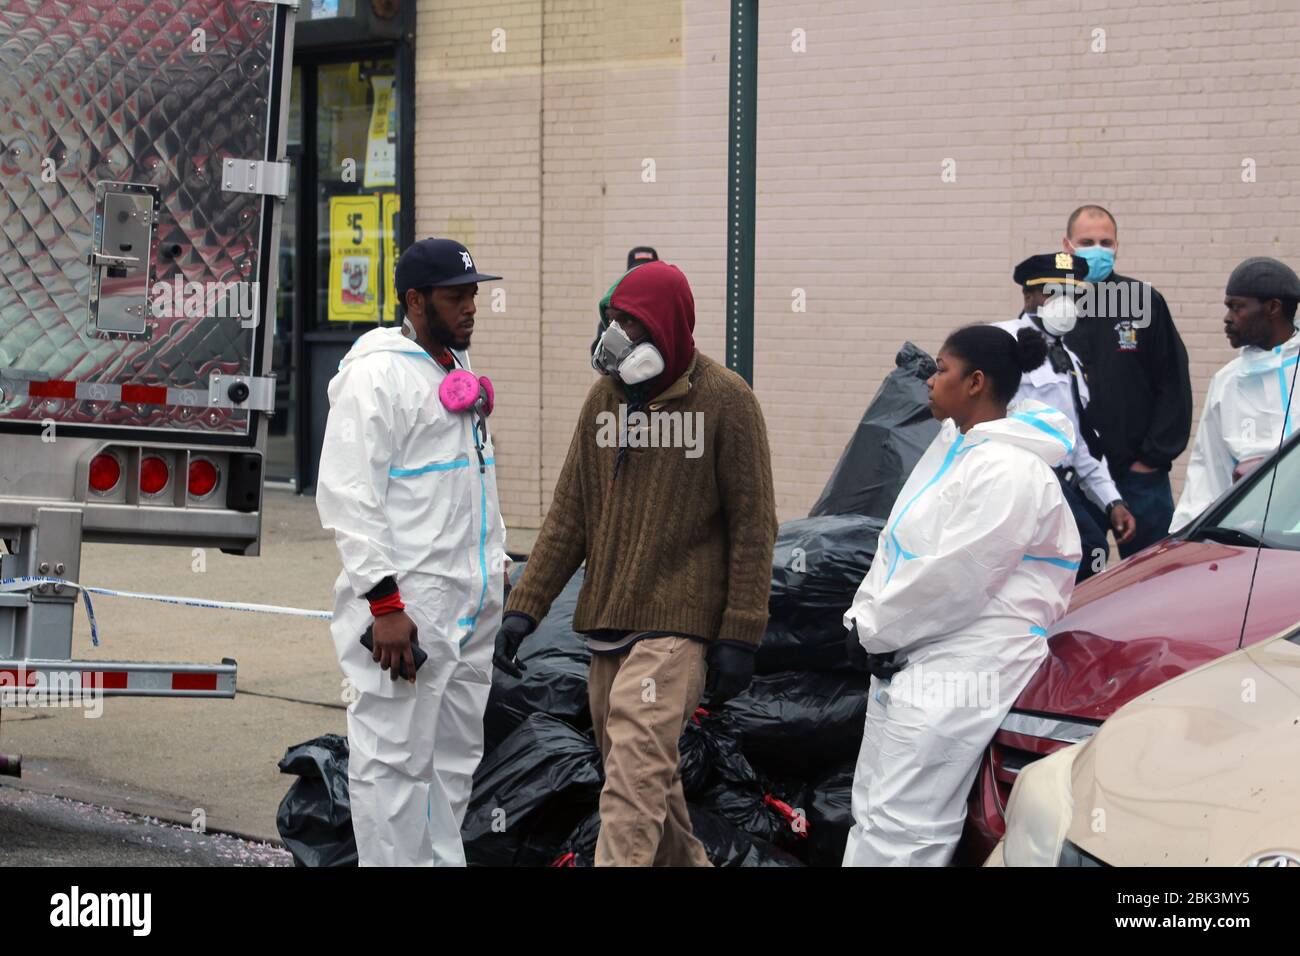 April 30, 2020, New York, New York, USA: Workers dressed in hazmat or masked faces stand in the back of a large refrigerated truck in front of the Andrew T. Cleckley Funeral Home in Brooklyn where bodies that weren't properly cared have been removed. 60 corpses were stored in 4 rented vehiciles lining the street along stores. Neighbors reported a foul smell and fluids dripping from the trucks. The funeral home was overwhelmed by COVID-19 deaths, waiting for weeks for cremations in New York. (Credit Image: © Marie Le Ble/ZUMA Wire) Stock Photo